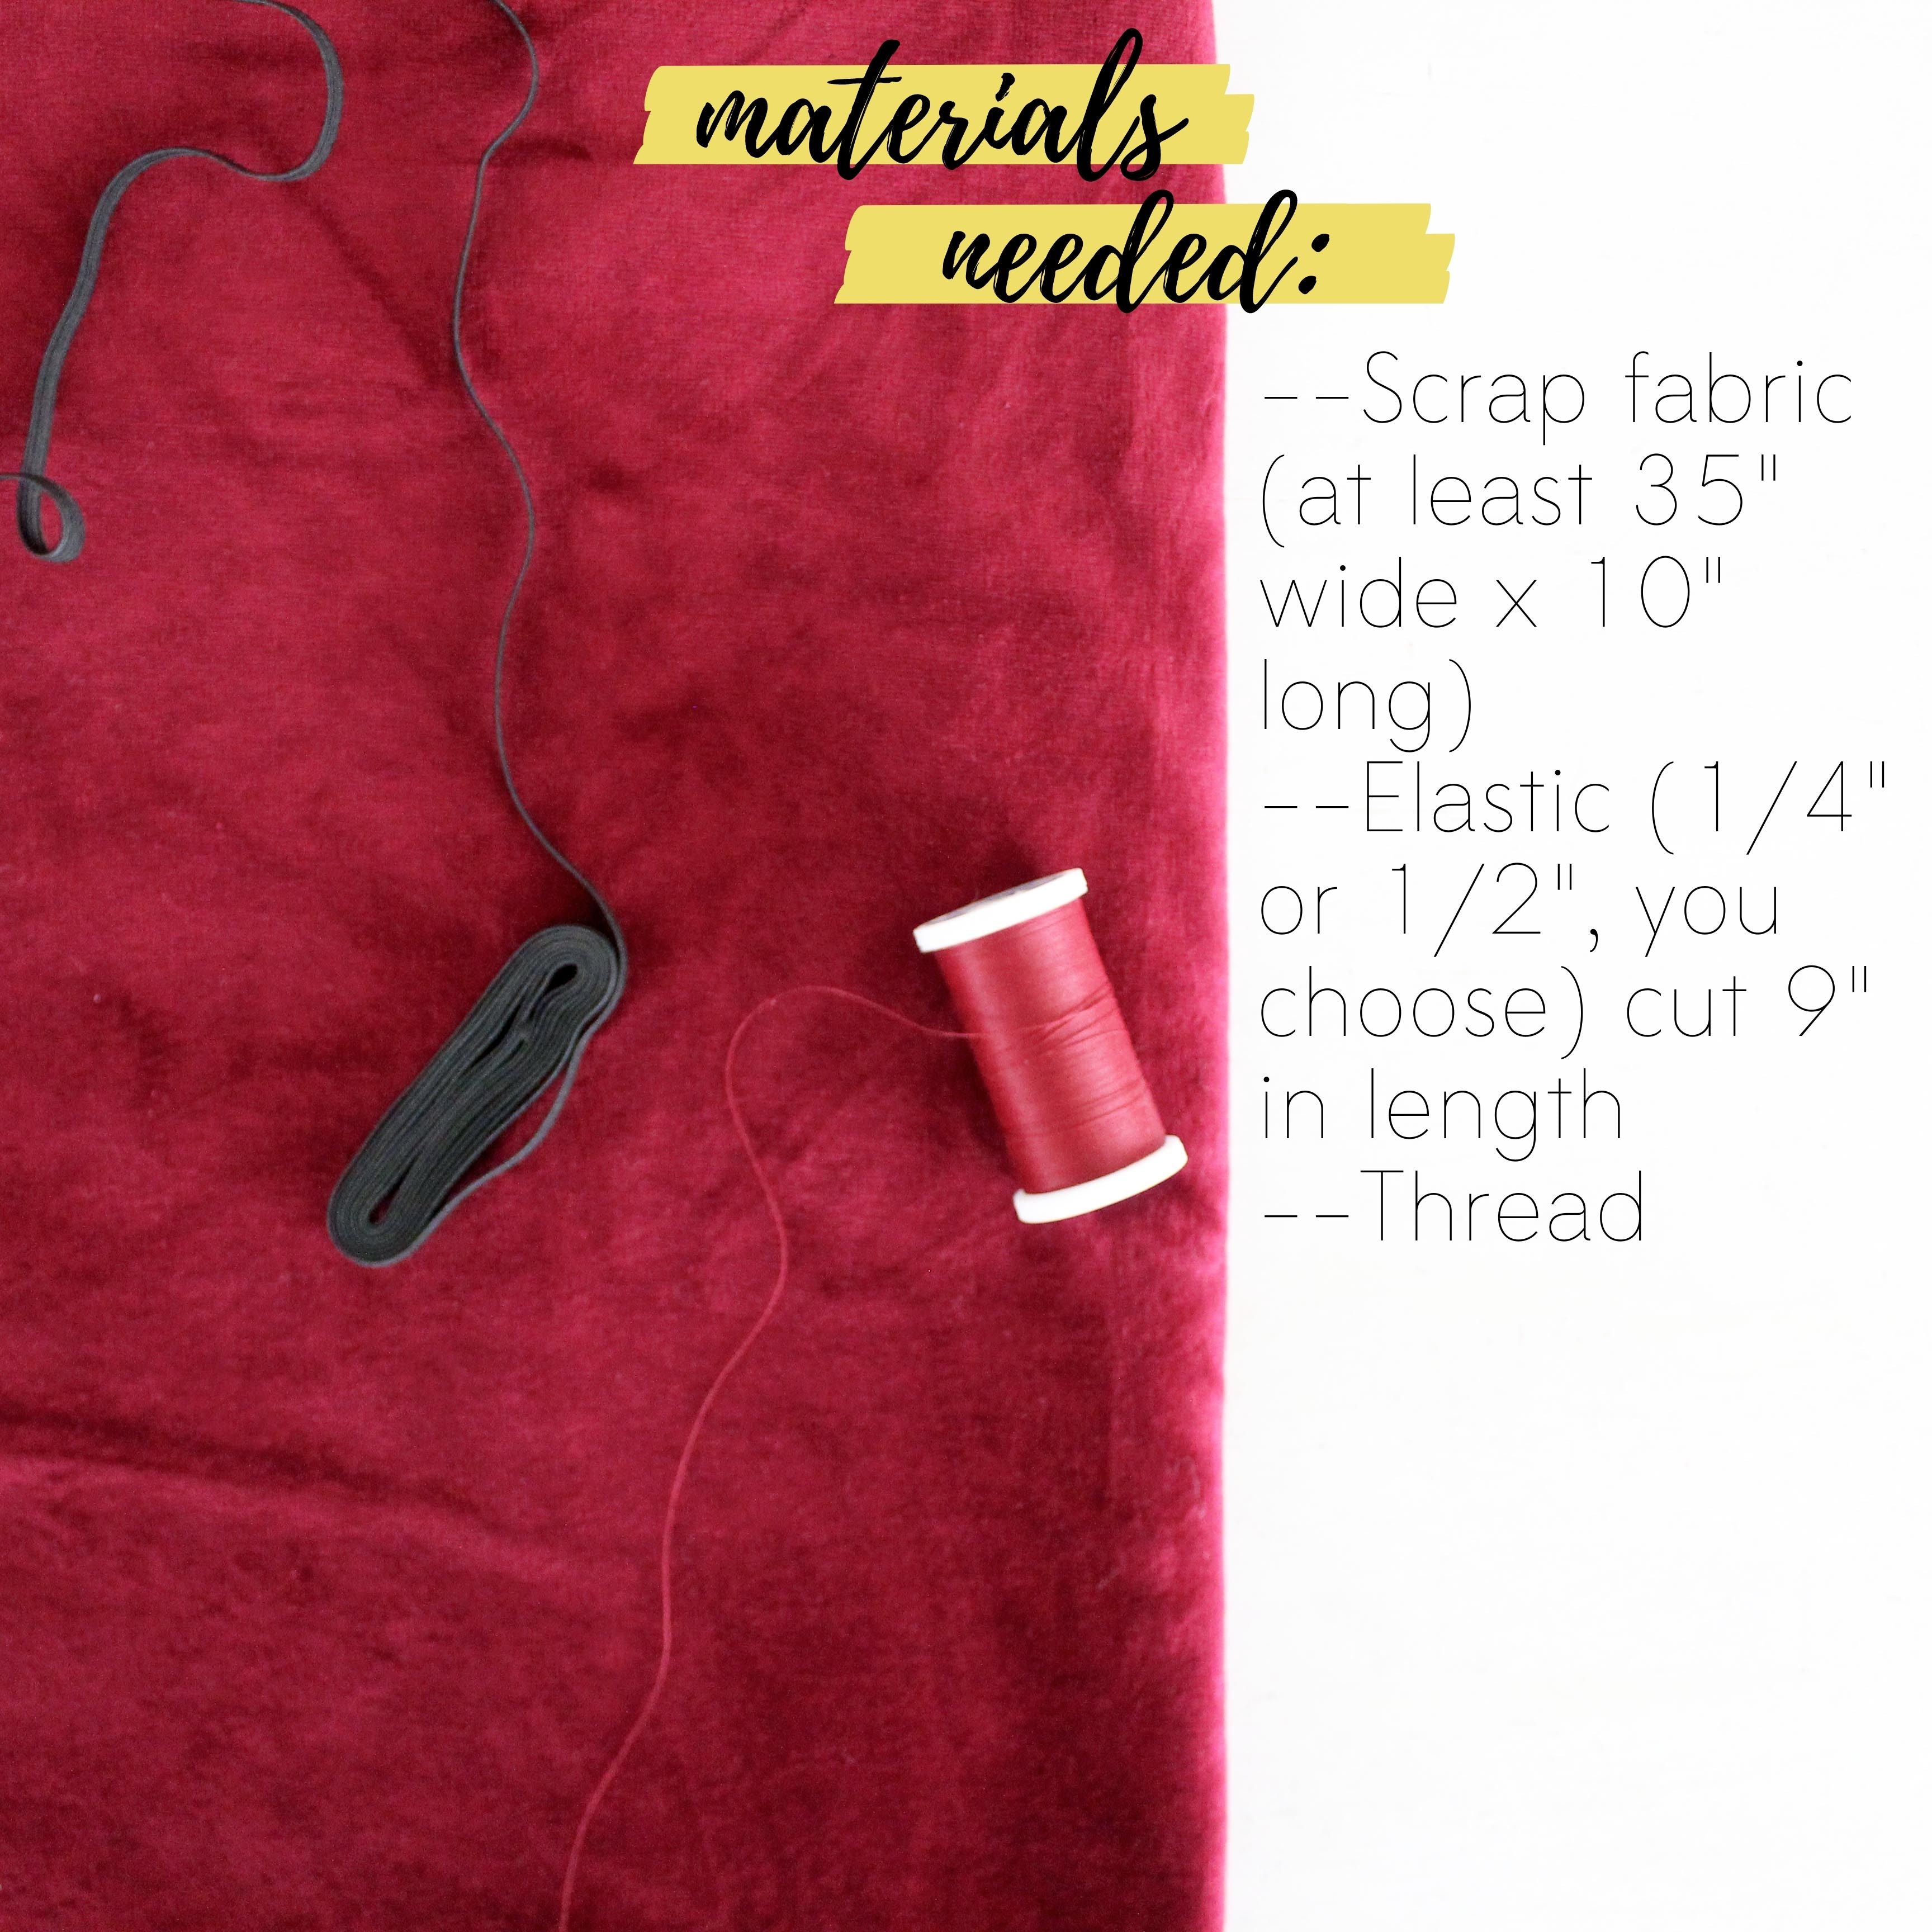 How To Make A Scrunchie DIY Sewing Tutorial: Materials Needed